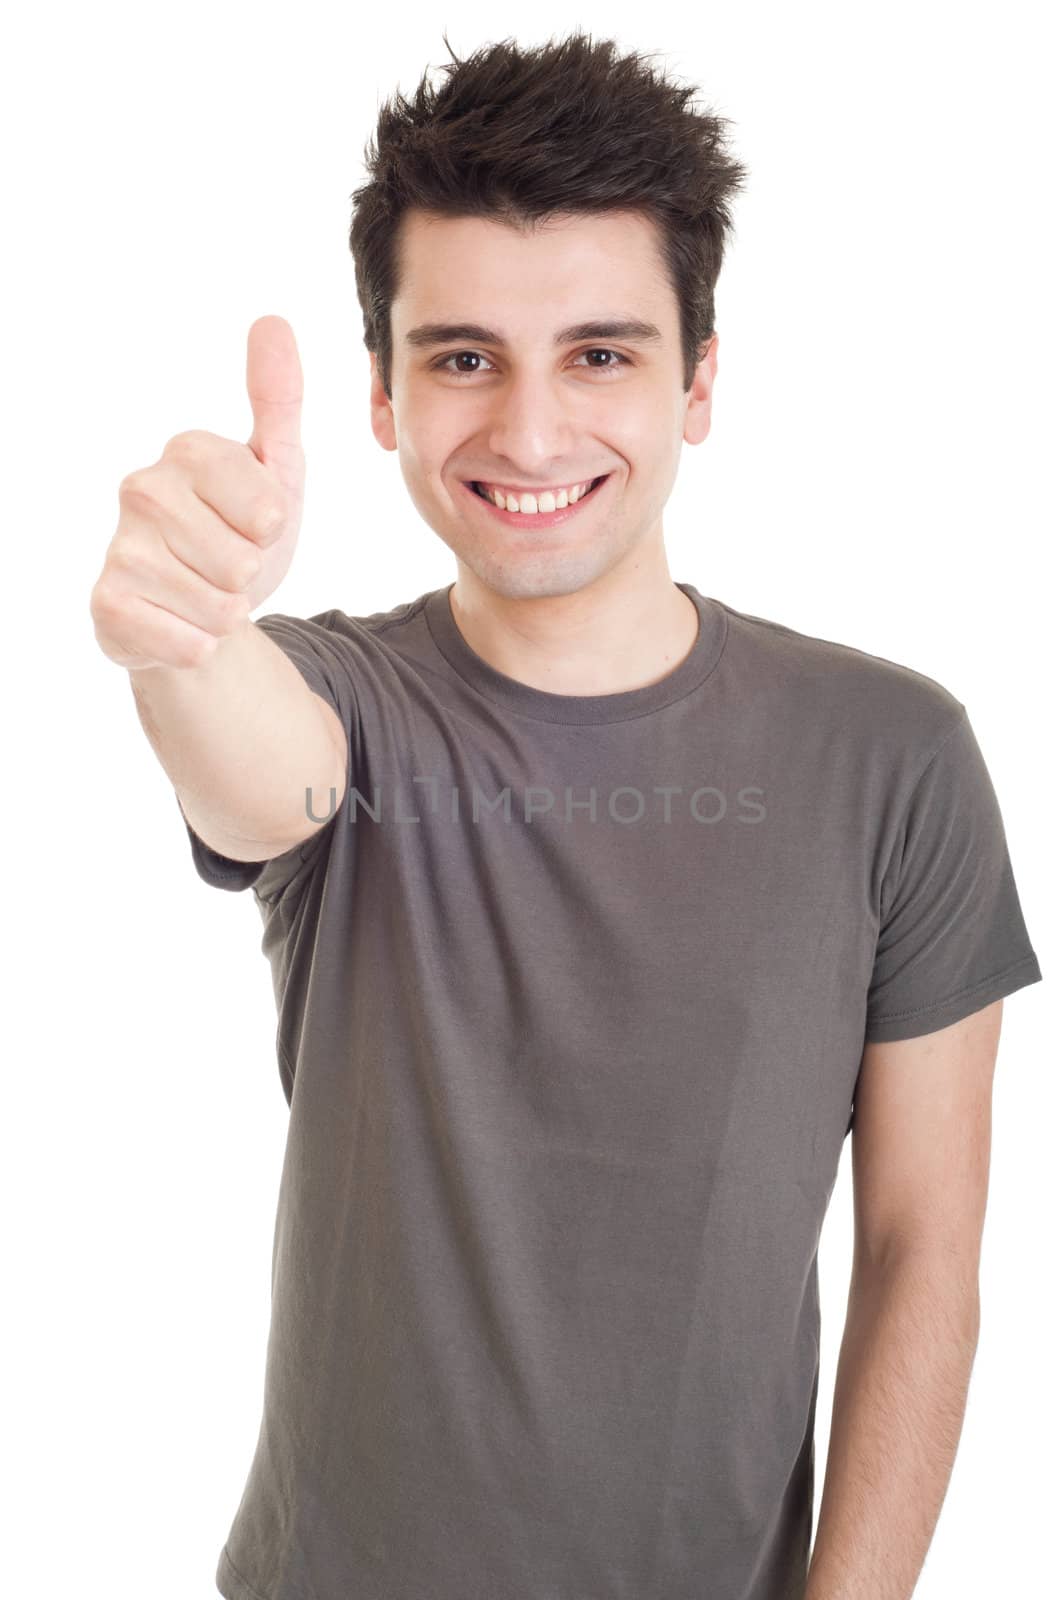 smiling young man with thumbs up on an isolated white background